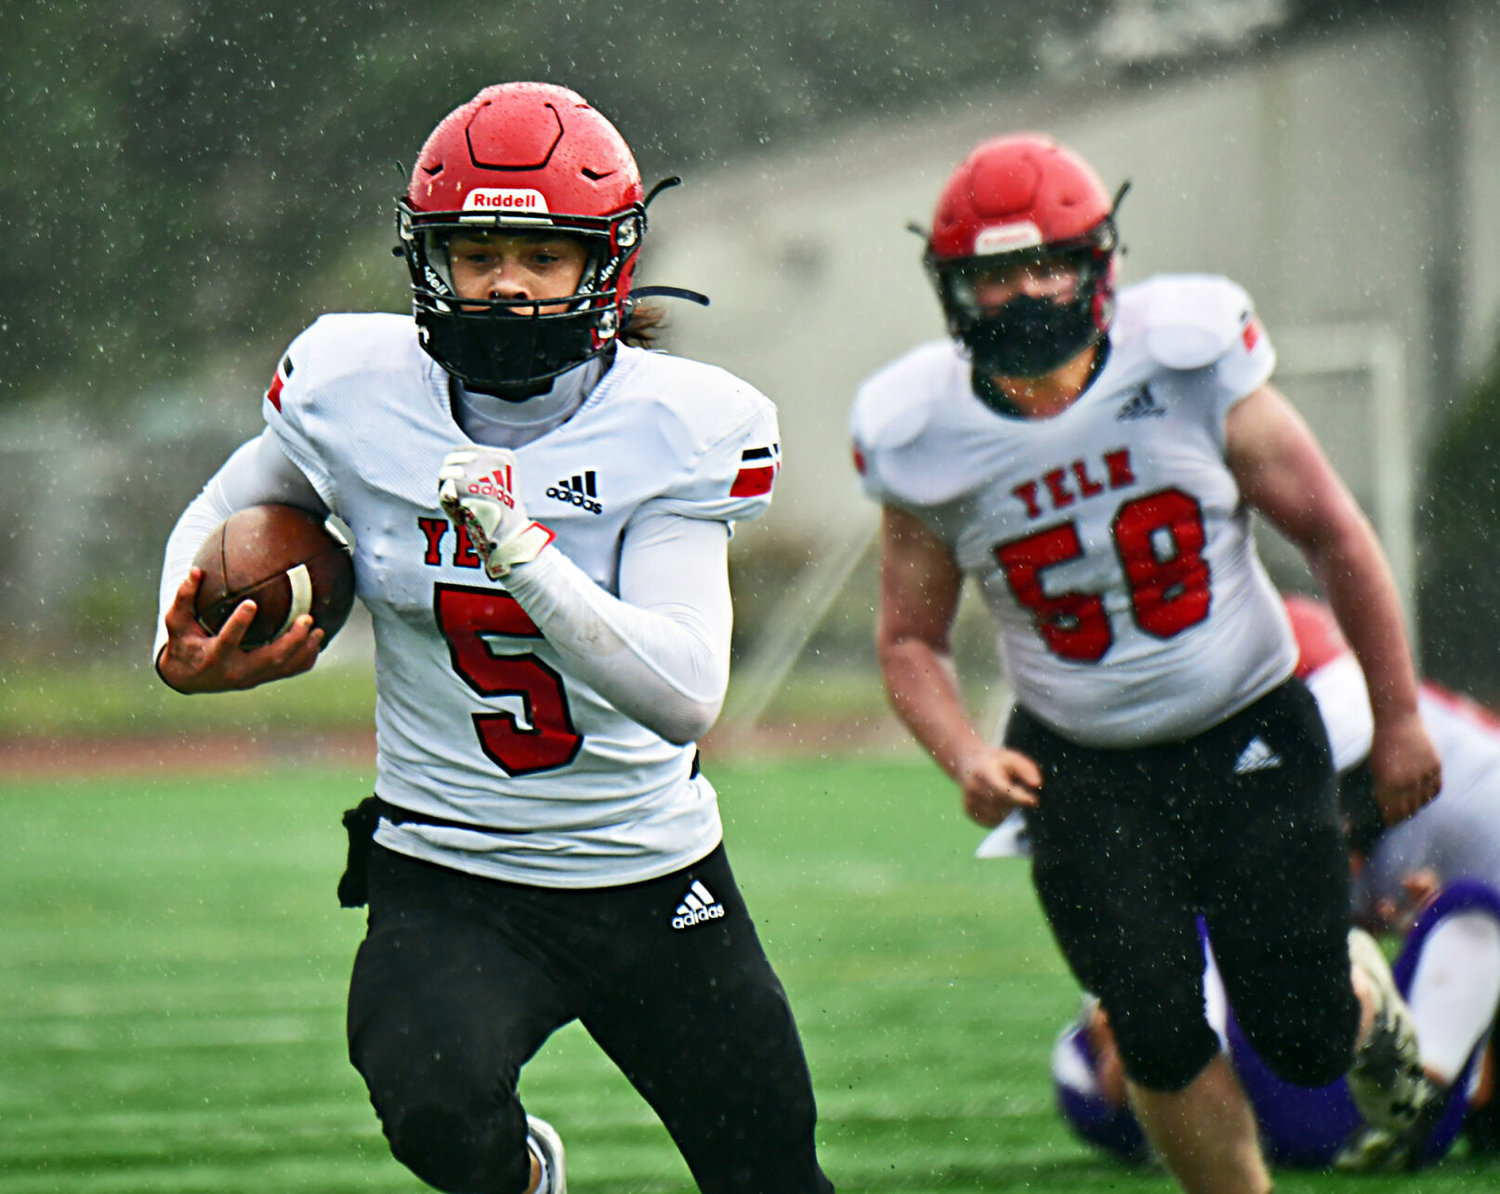 Yelm High School quarterback Kyler Ronquillo scampers for one of his many ground gains against North Thurston High School Friday, March 19, 2021 at South Sound Stadium.